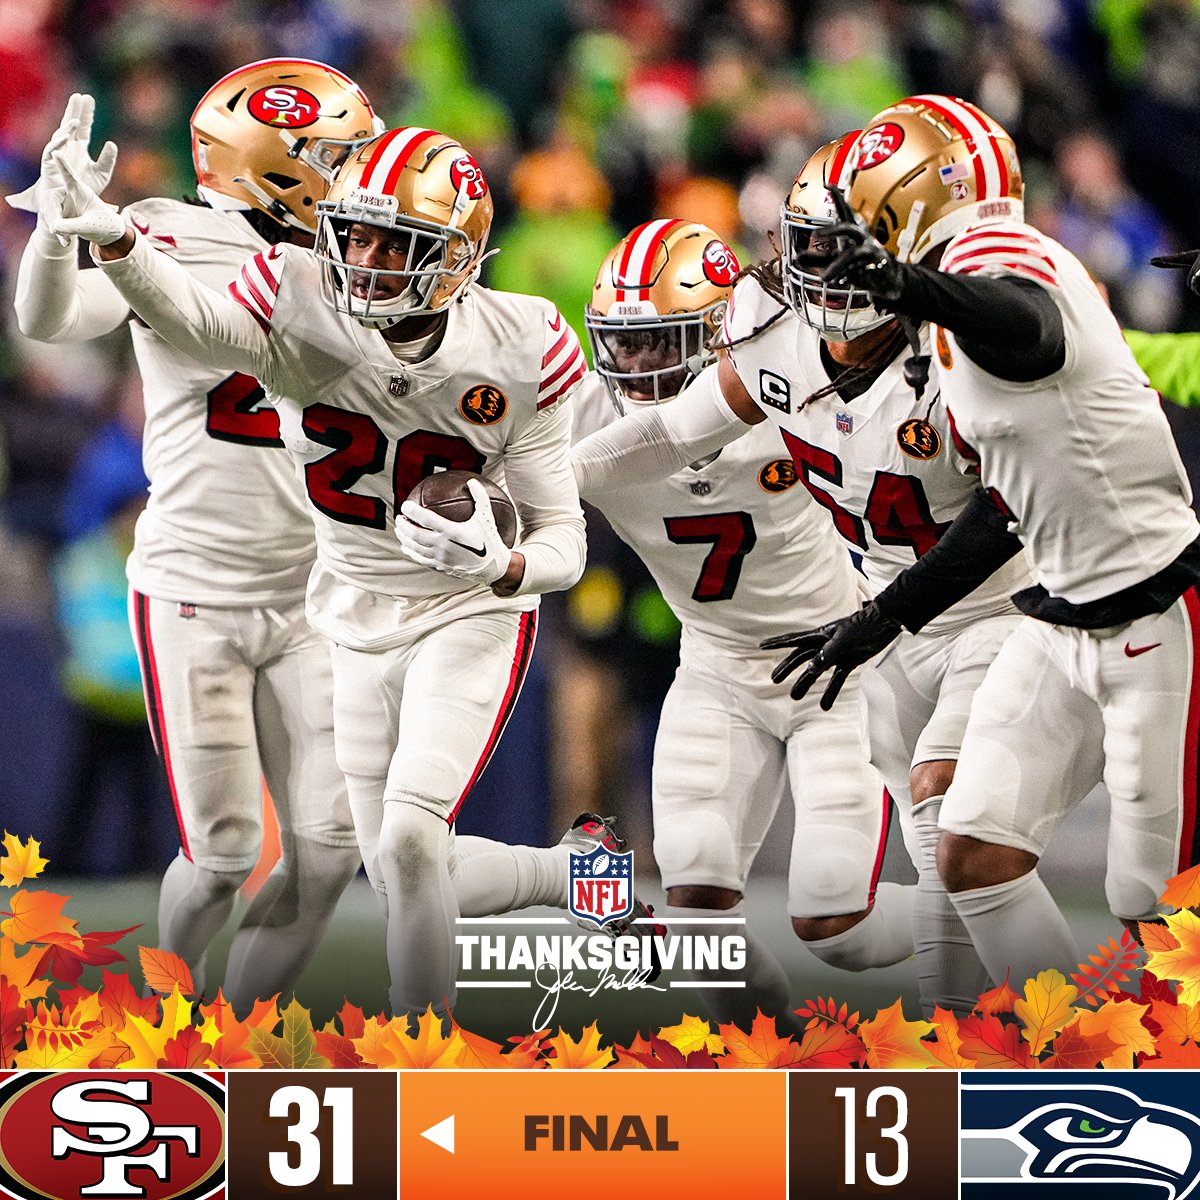 FINAL: @49ers finish #MaddenThanksgiving with a win! #SFvsSEA